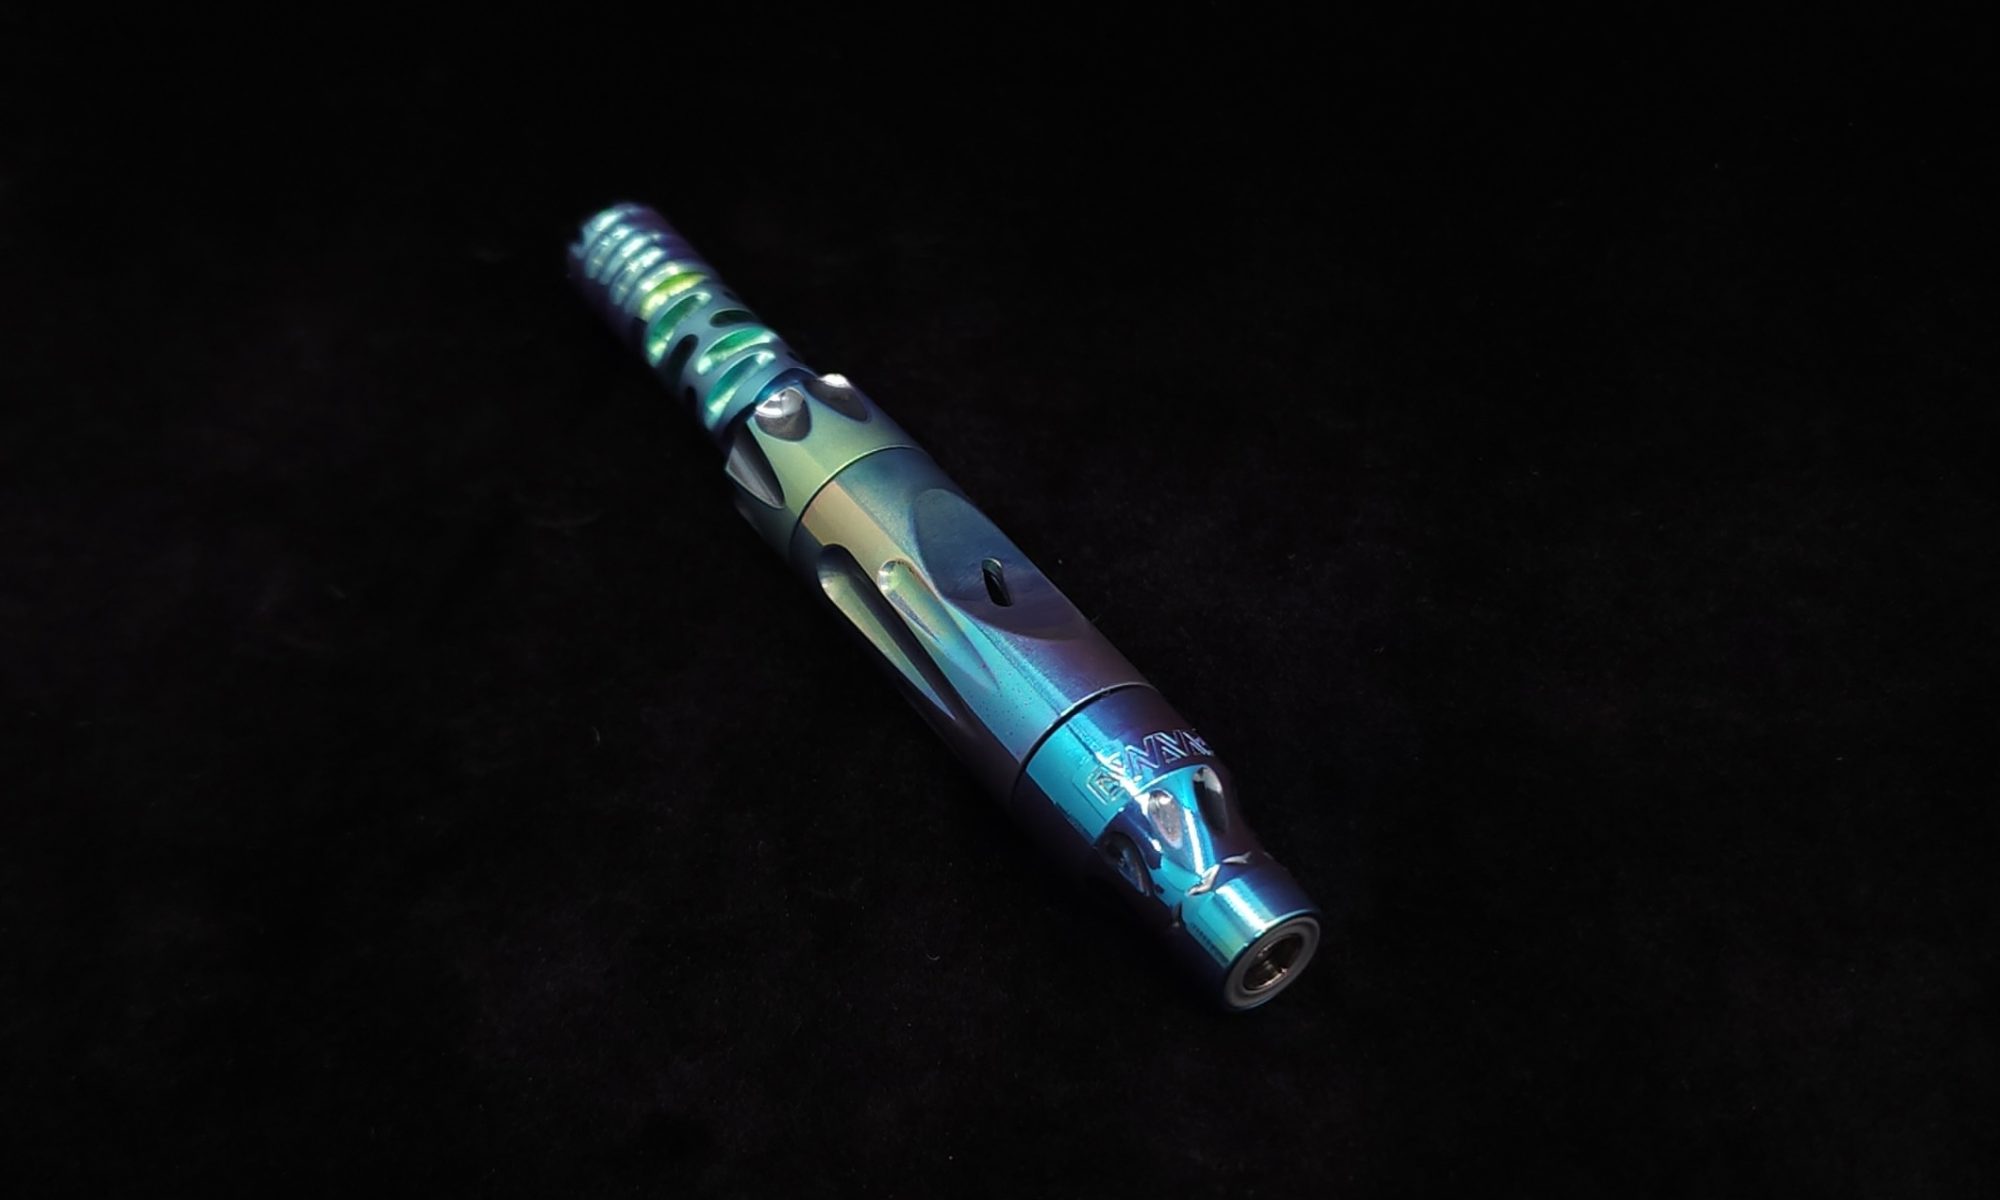 This image portrays Blue to Green-Custom Titanium Vong[i]/2023-Full Device(Ready to Ship) by Dovetail Woodwork.